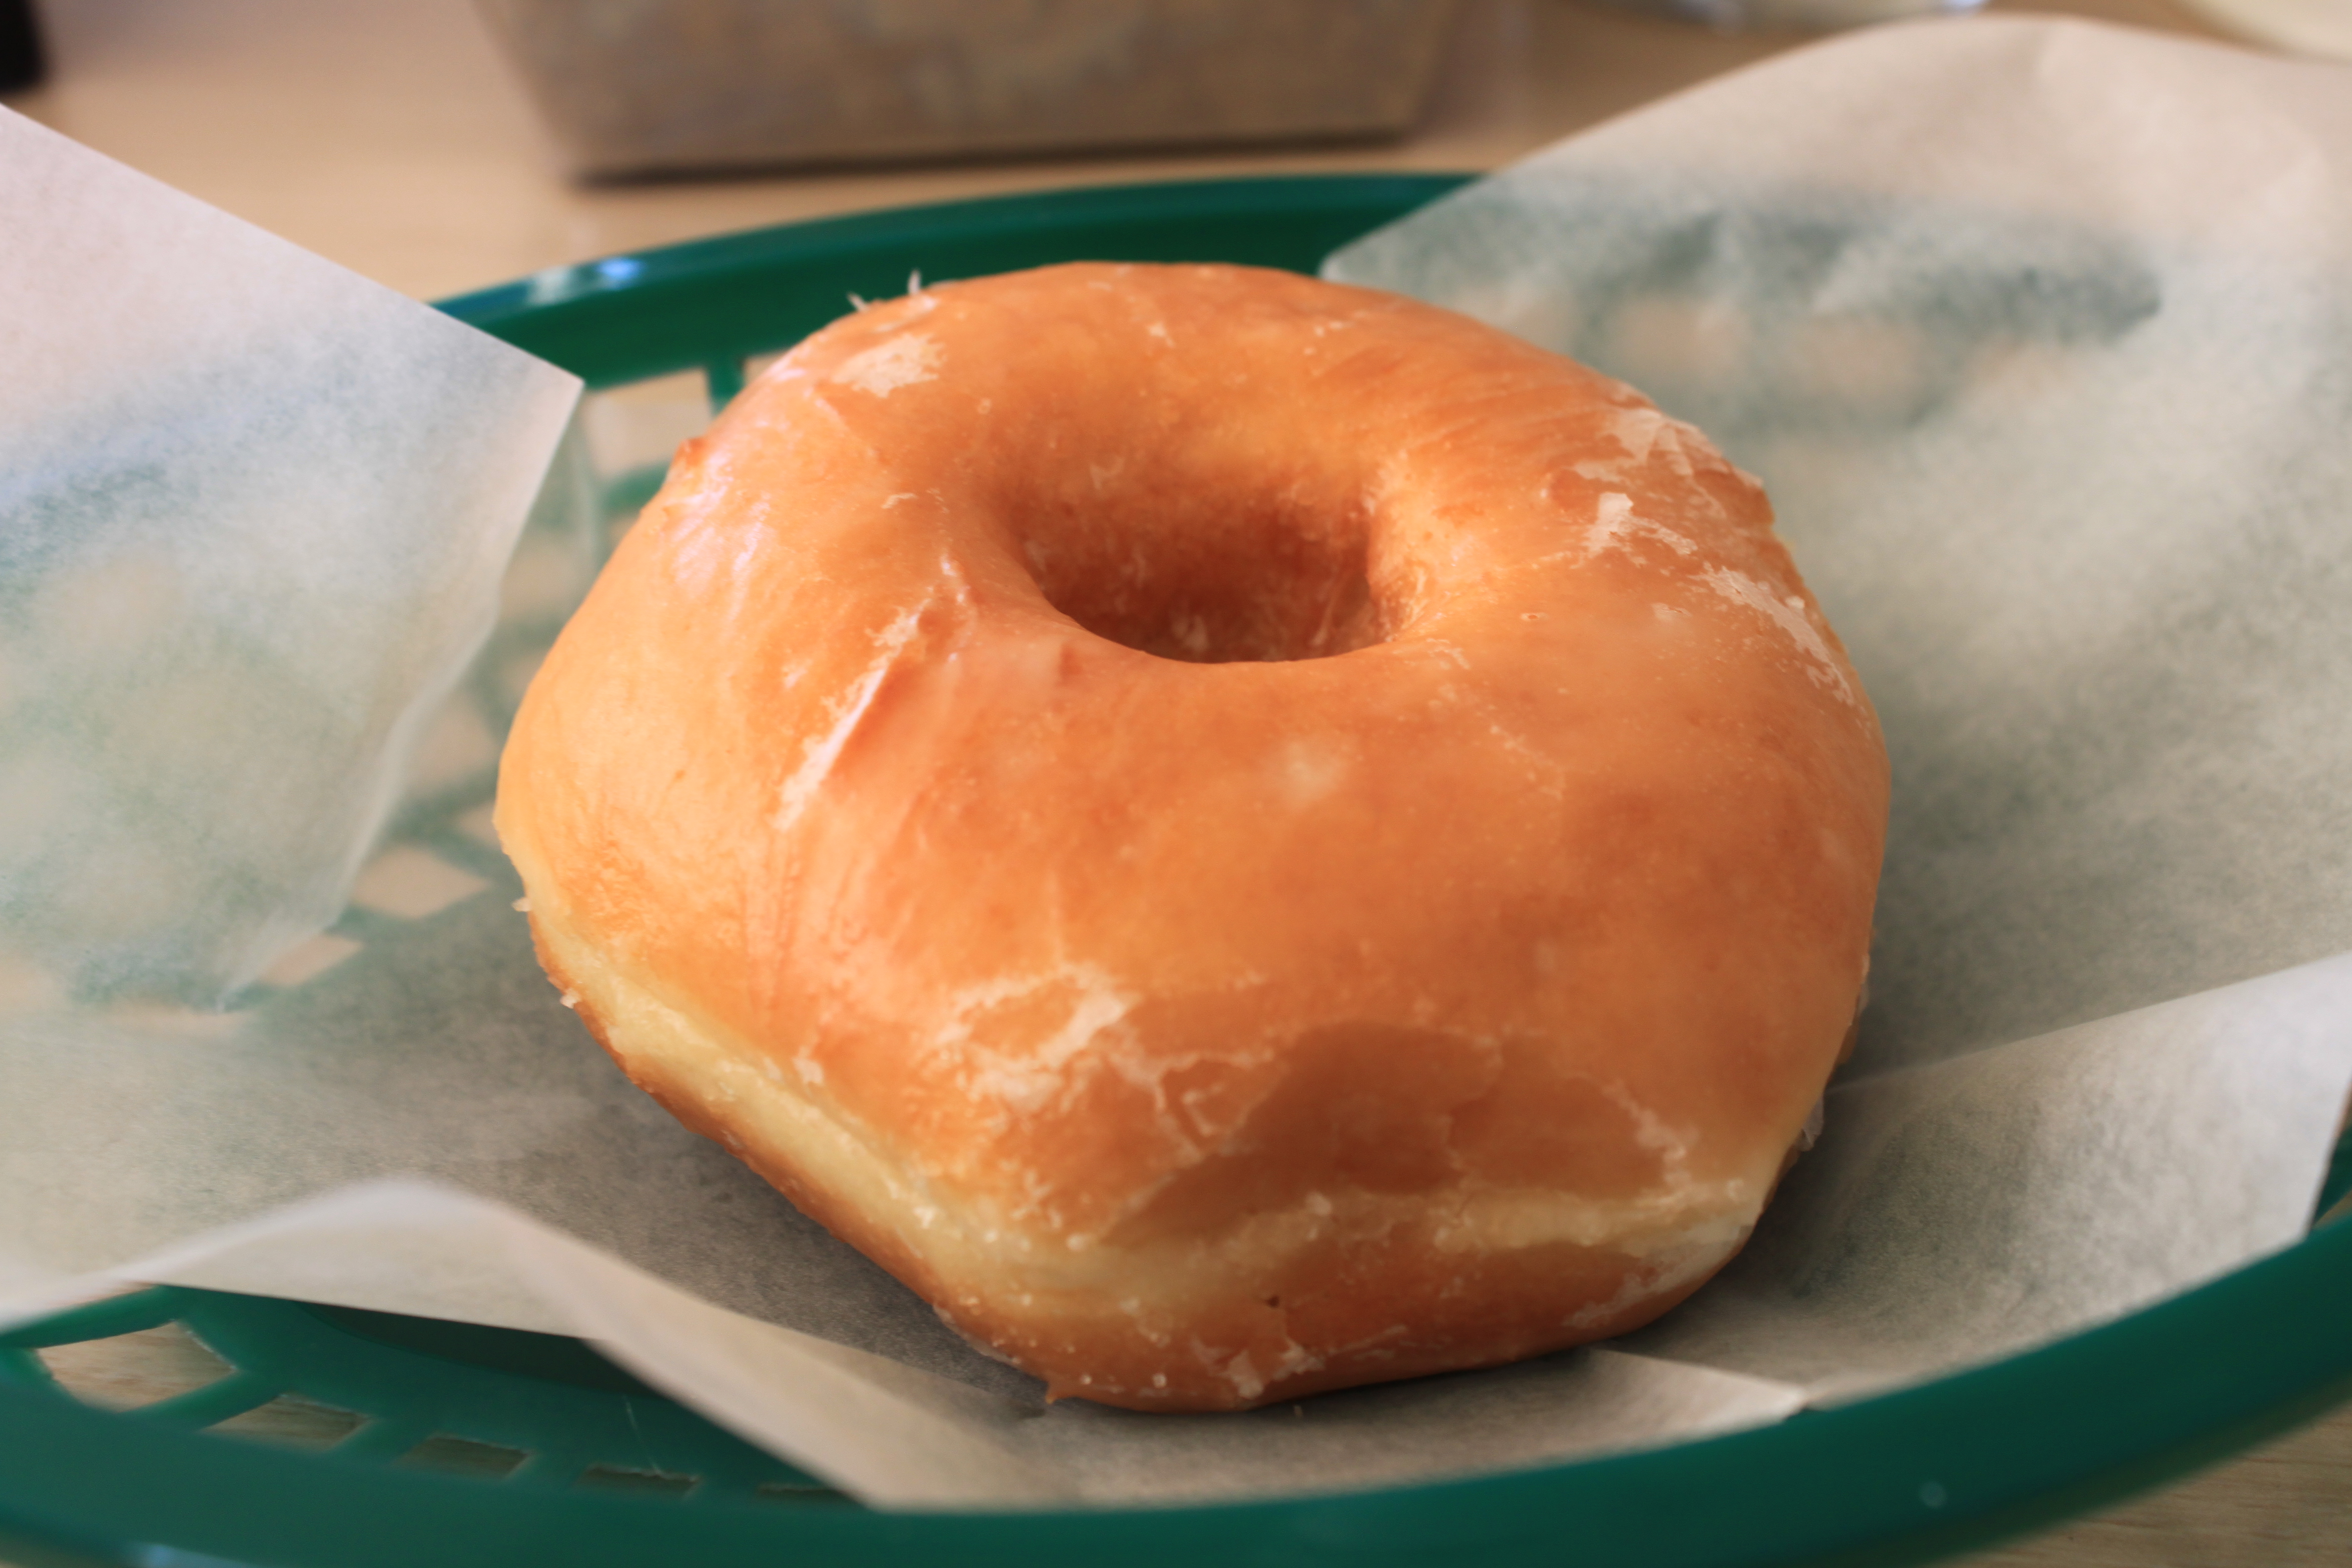 Bradenton Donuts: “As you travel through life friend, no matter what your goal, keep your eye upon the donut and not upon the hole:”